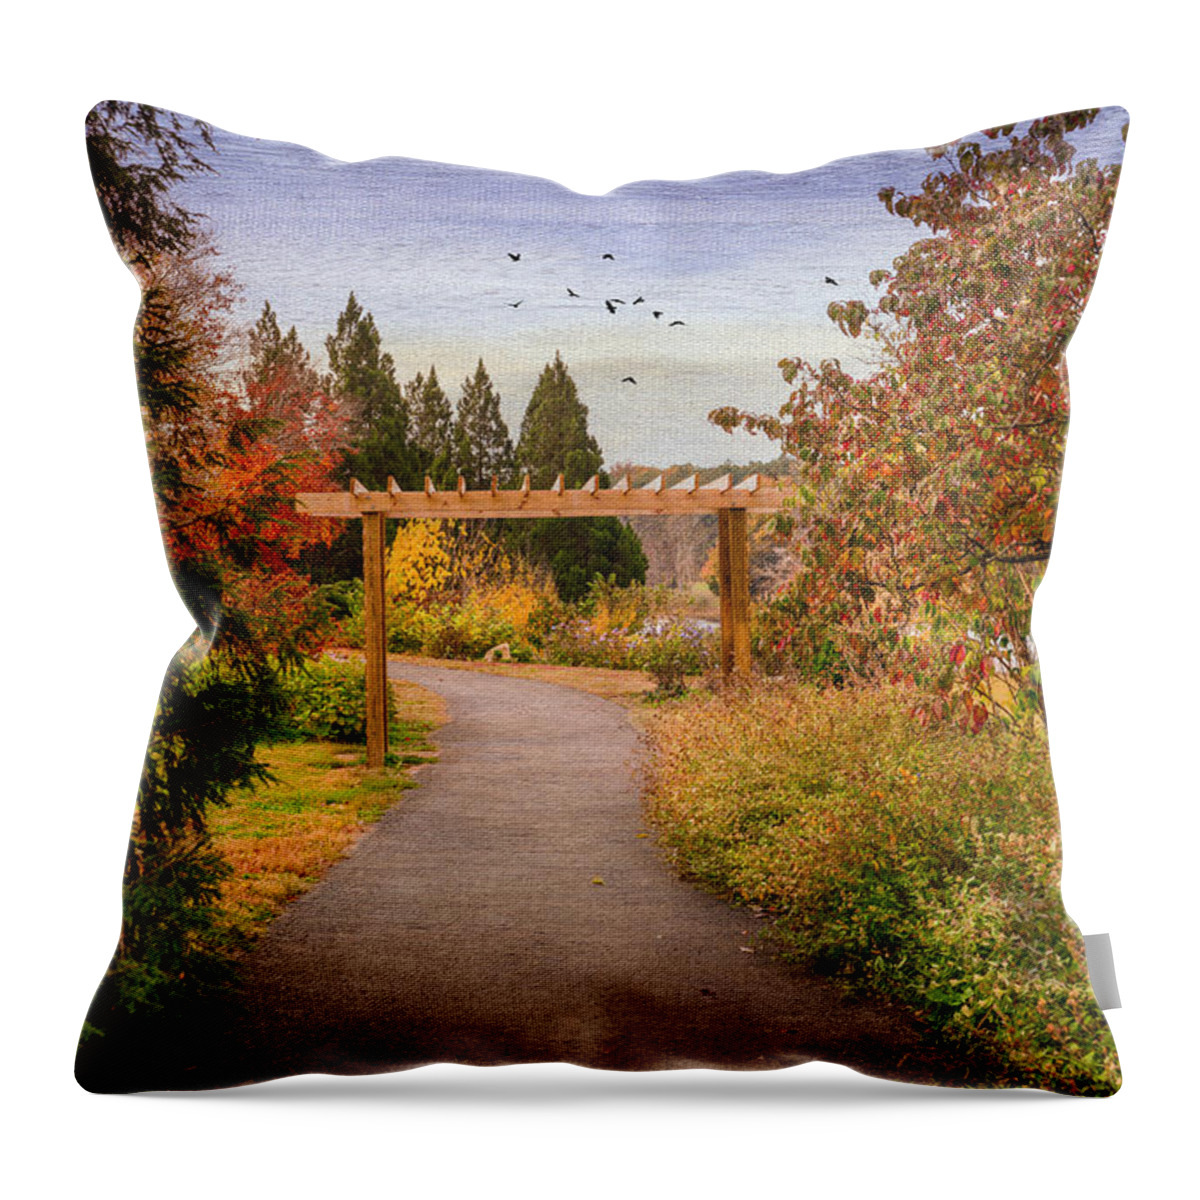 Bernheim Arboretum And Research Forest. Bardstown Throw Pillow featuring the photograph The Golden Path by Mary Timman